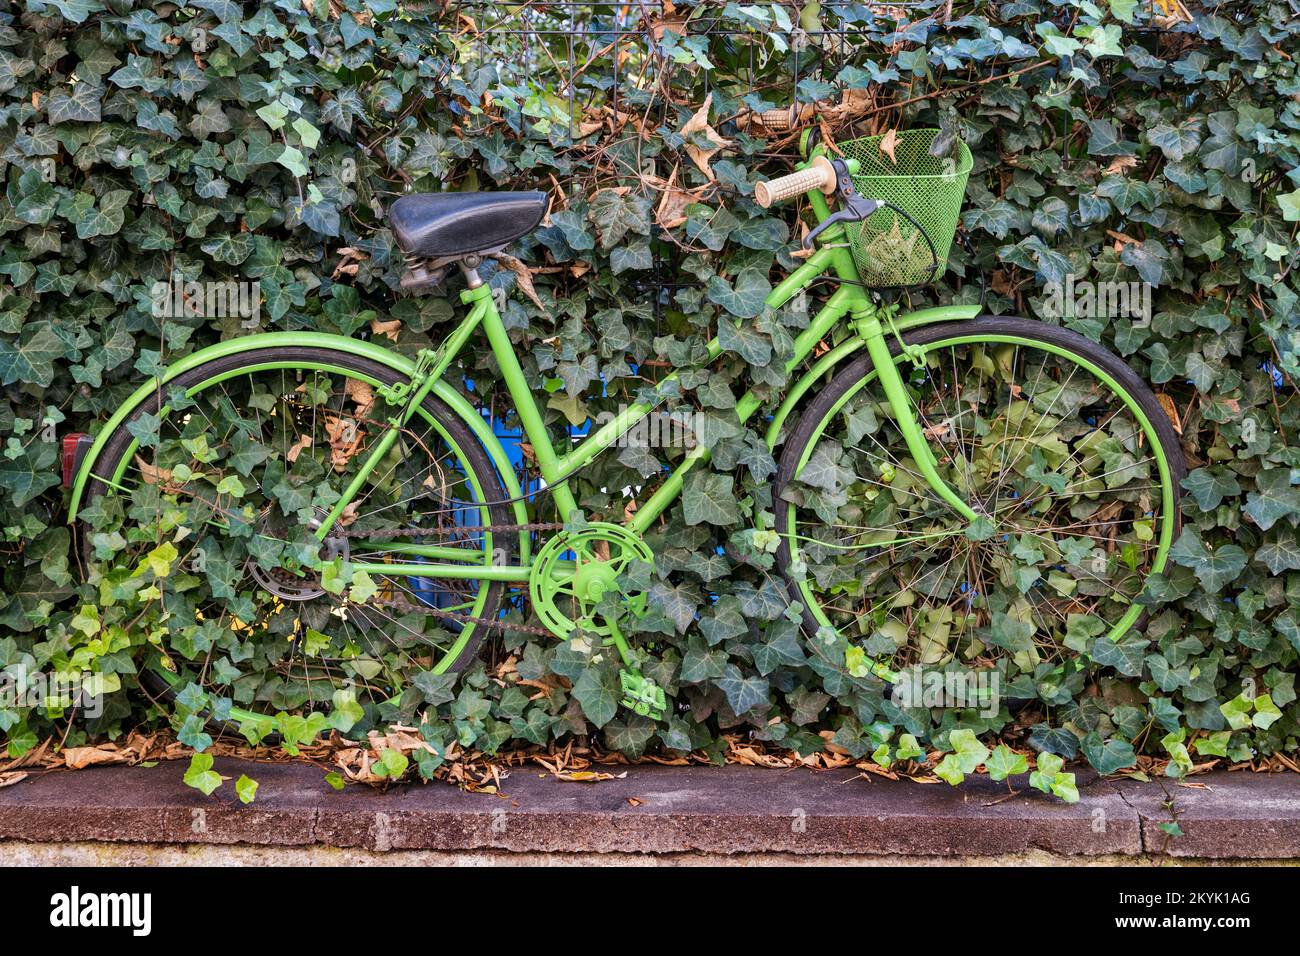 Green vintage bike, ladies retro bicycle with step-through frame left fixed to a fence covered with ivy climbing plants. Stock Photo